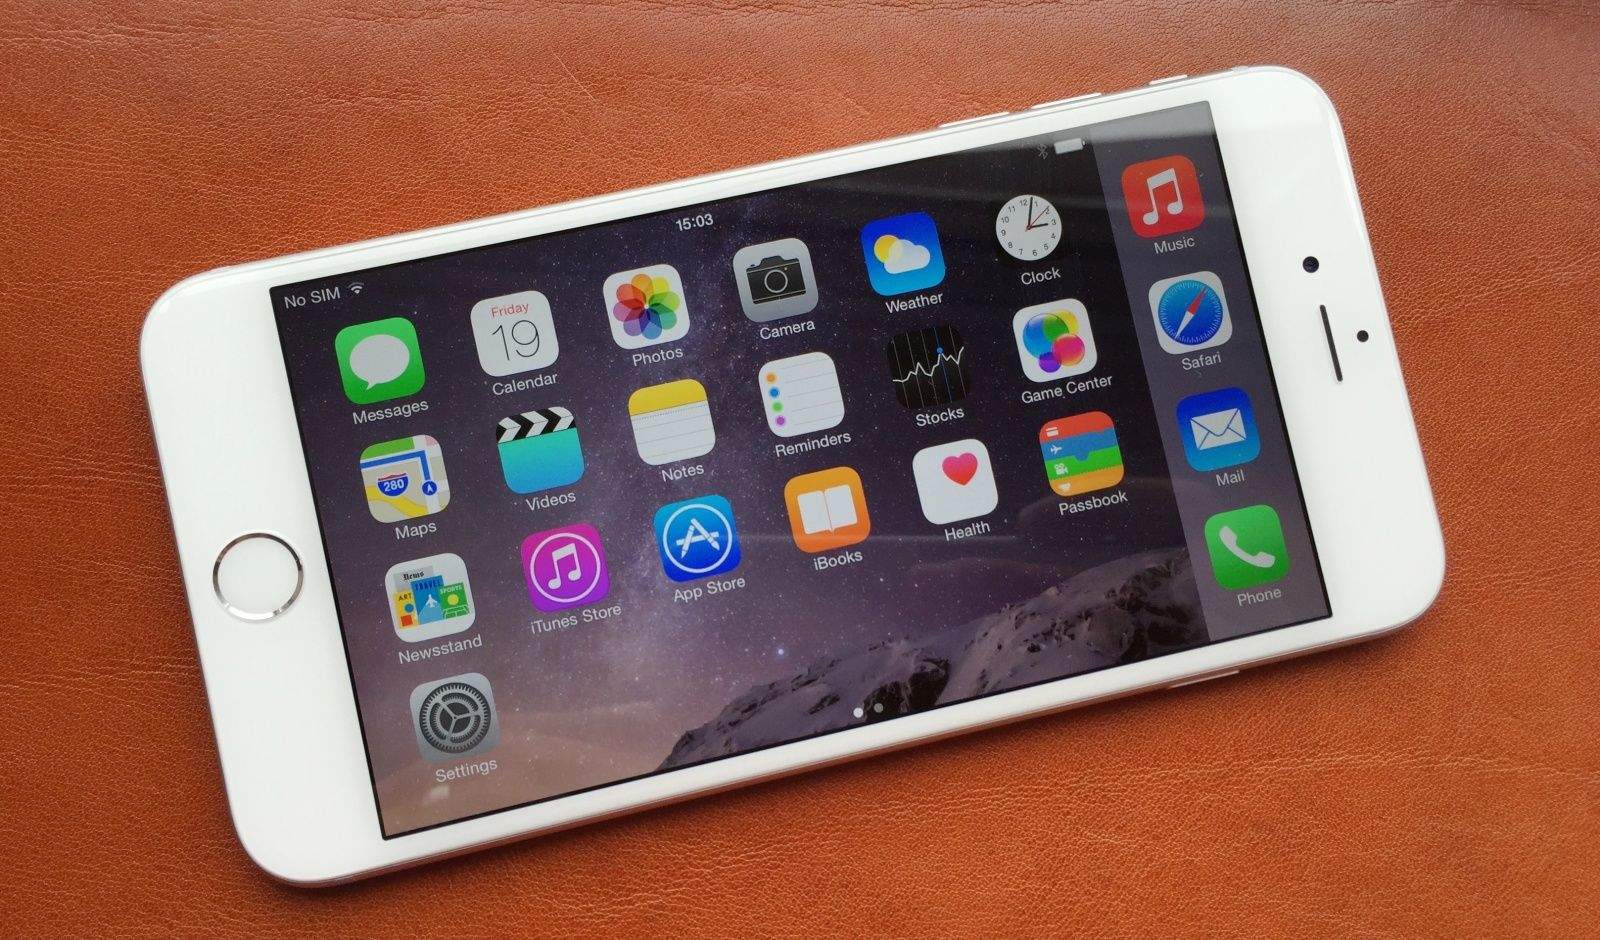 The iPhone 6 Plus is already king of the phablets. Photo: Killian Bell/Cult of Mac